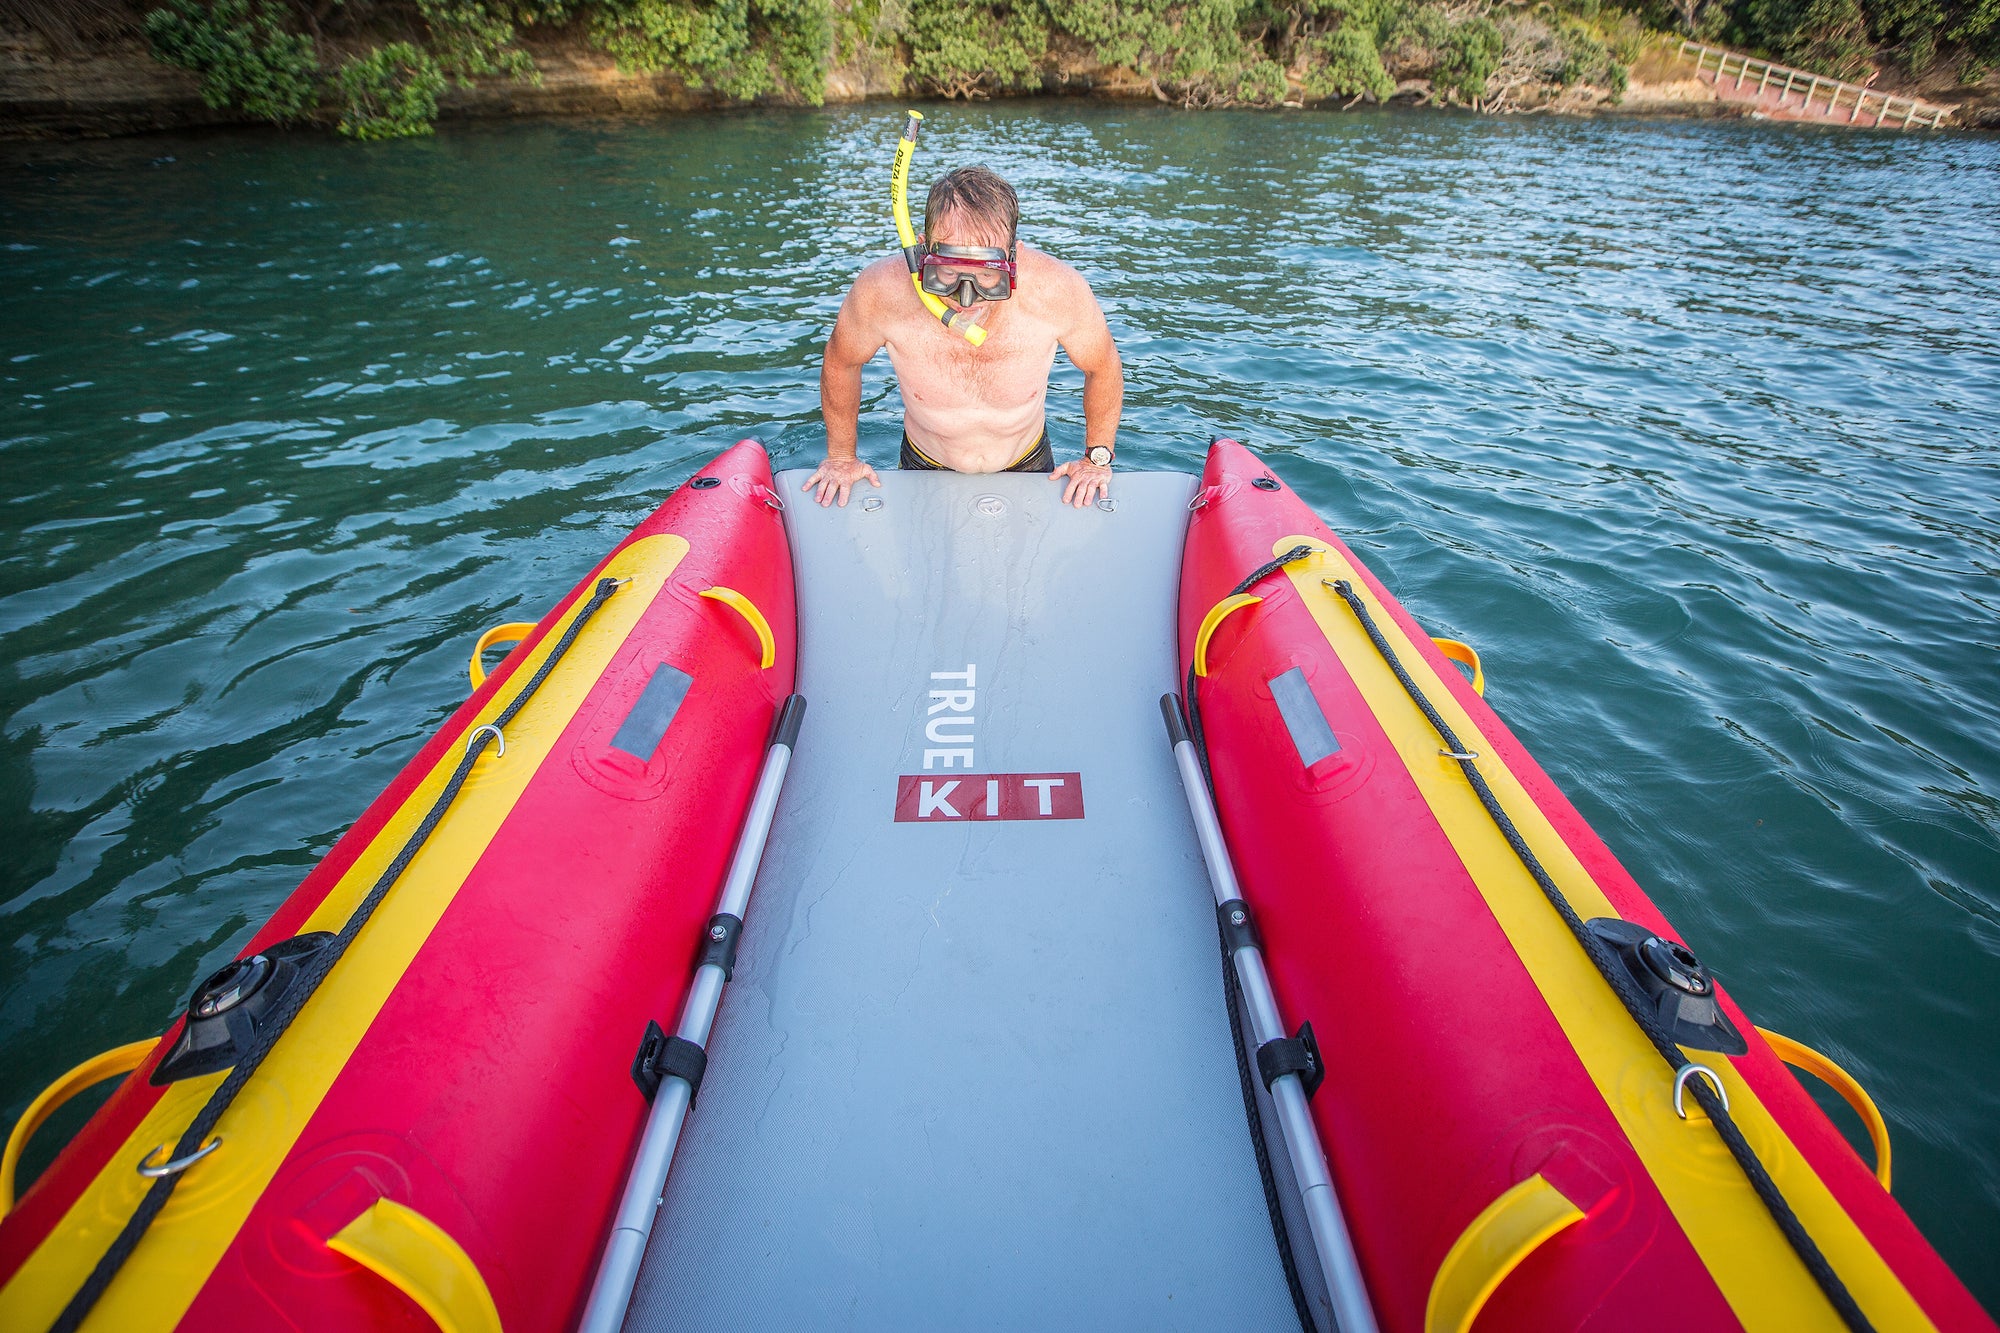 Discovery inflatable catamarans are easy to climb into from the water